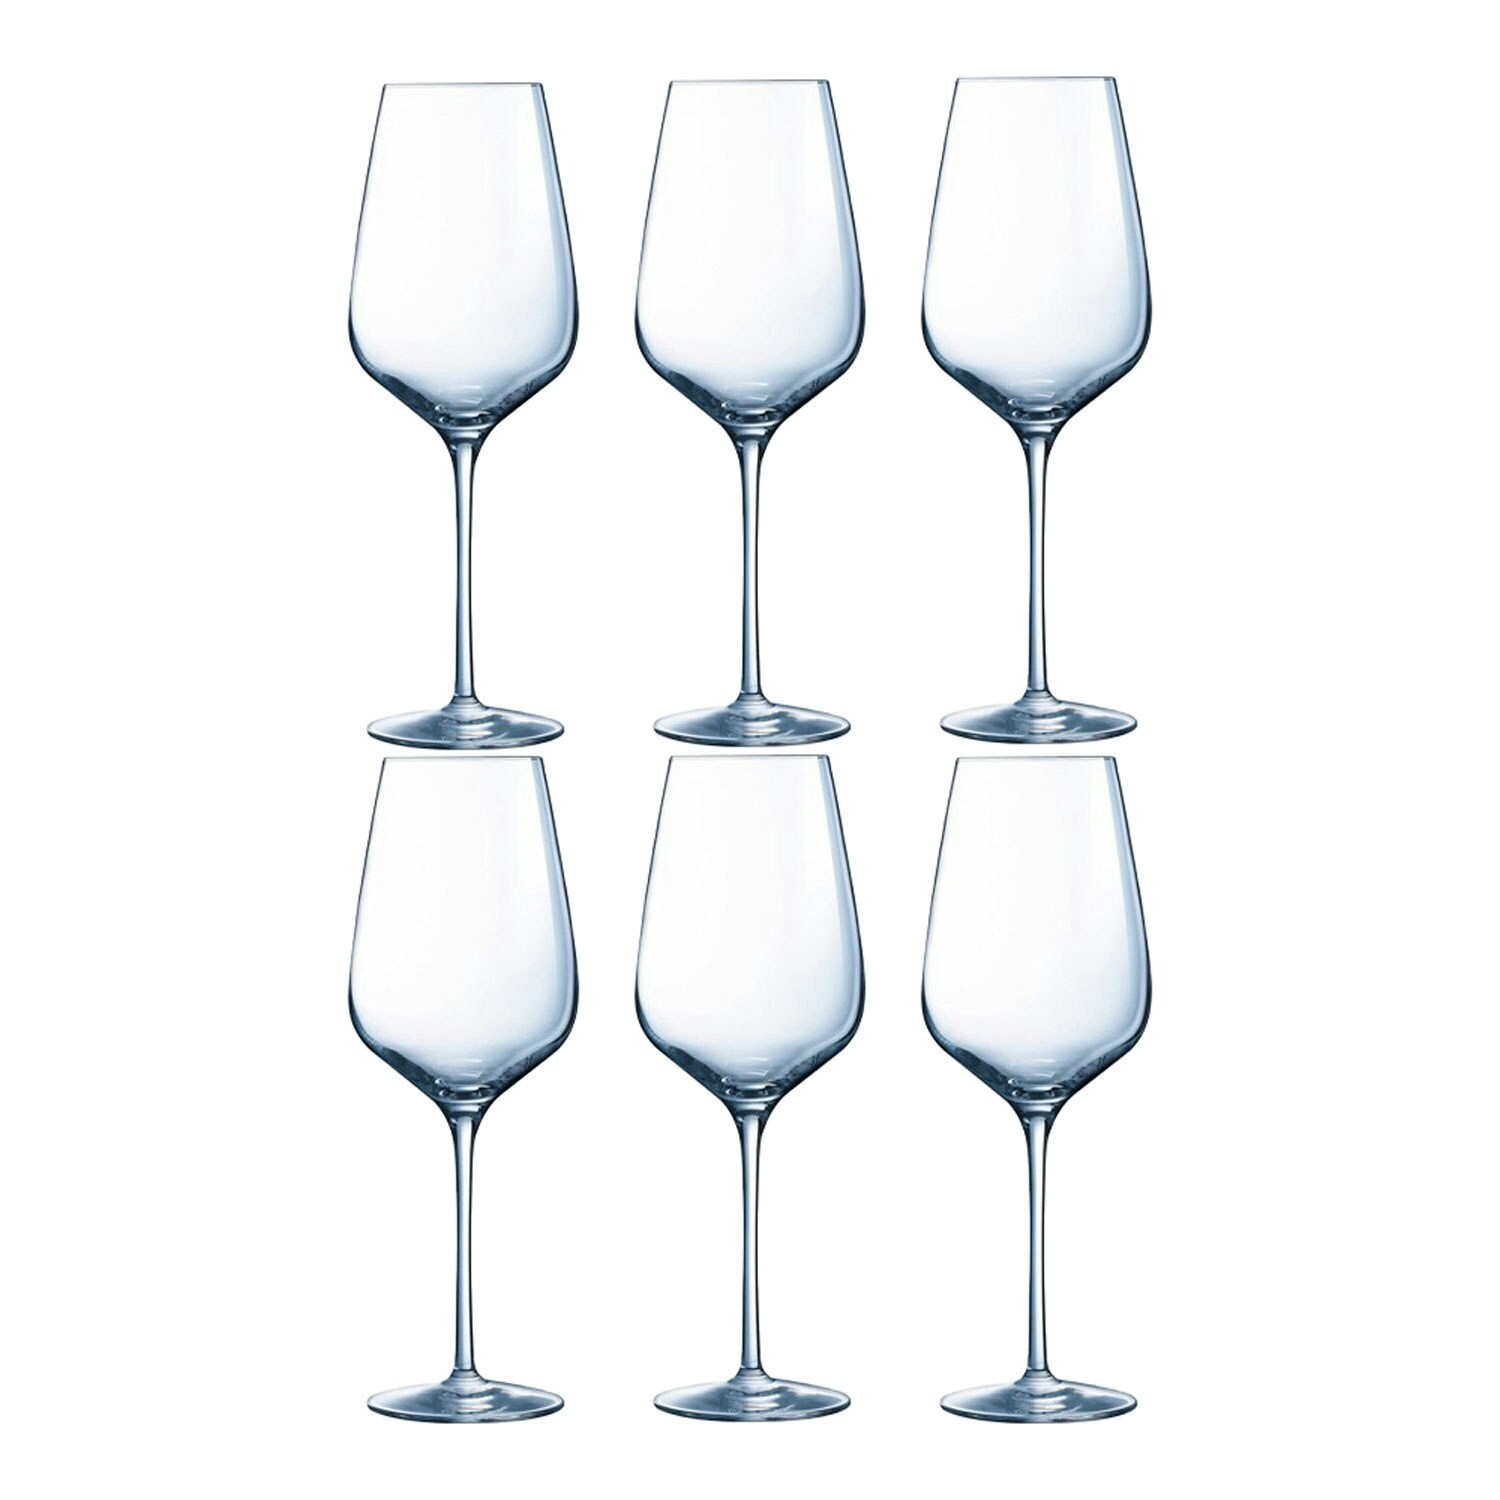 https://royaldesign.com/image/2/chefsommelier-sublym-white-wine-glass-25-cl-6-pack-0